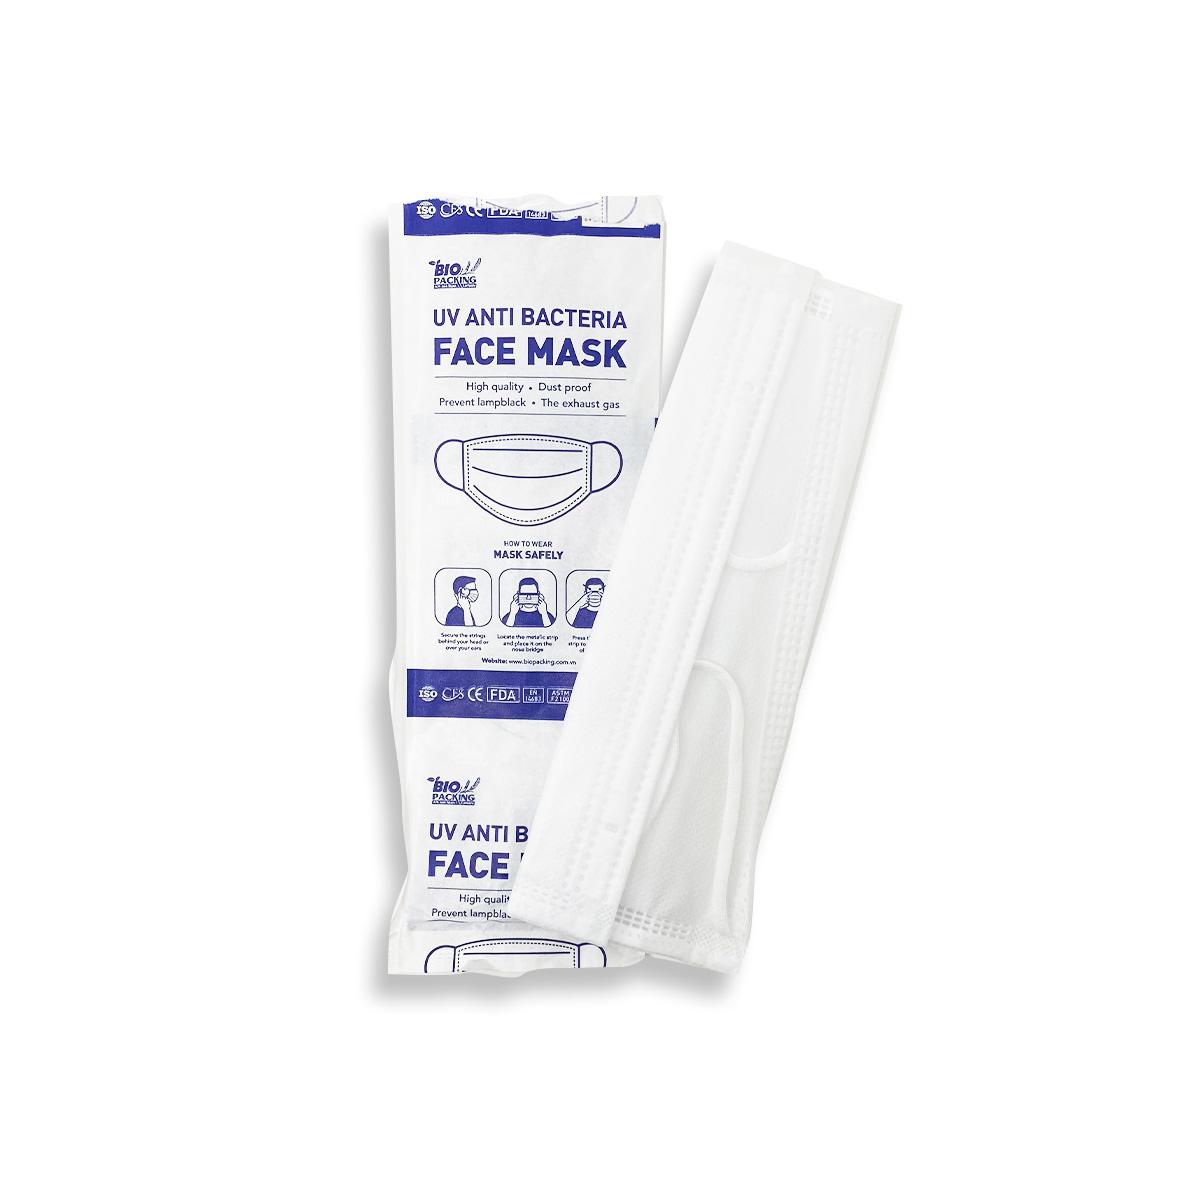 Bright White Masks 4-Ply – Individually Wrapped -BioPacking-eSafety Supplies, Inc